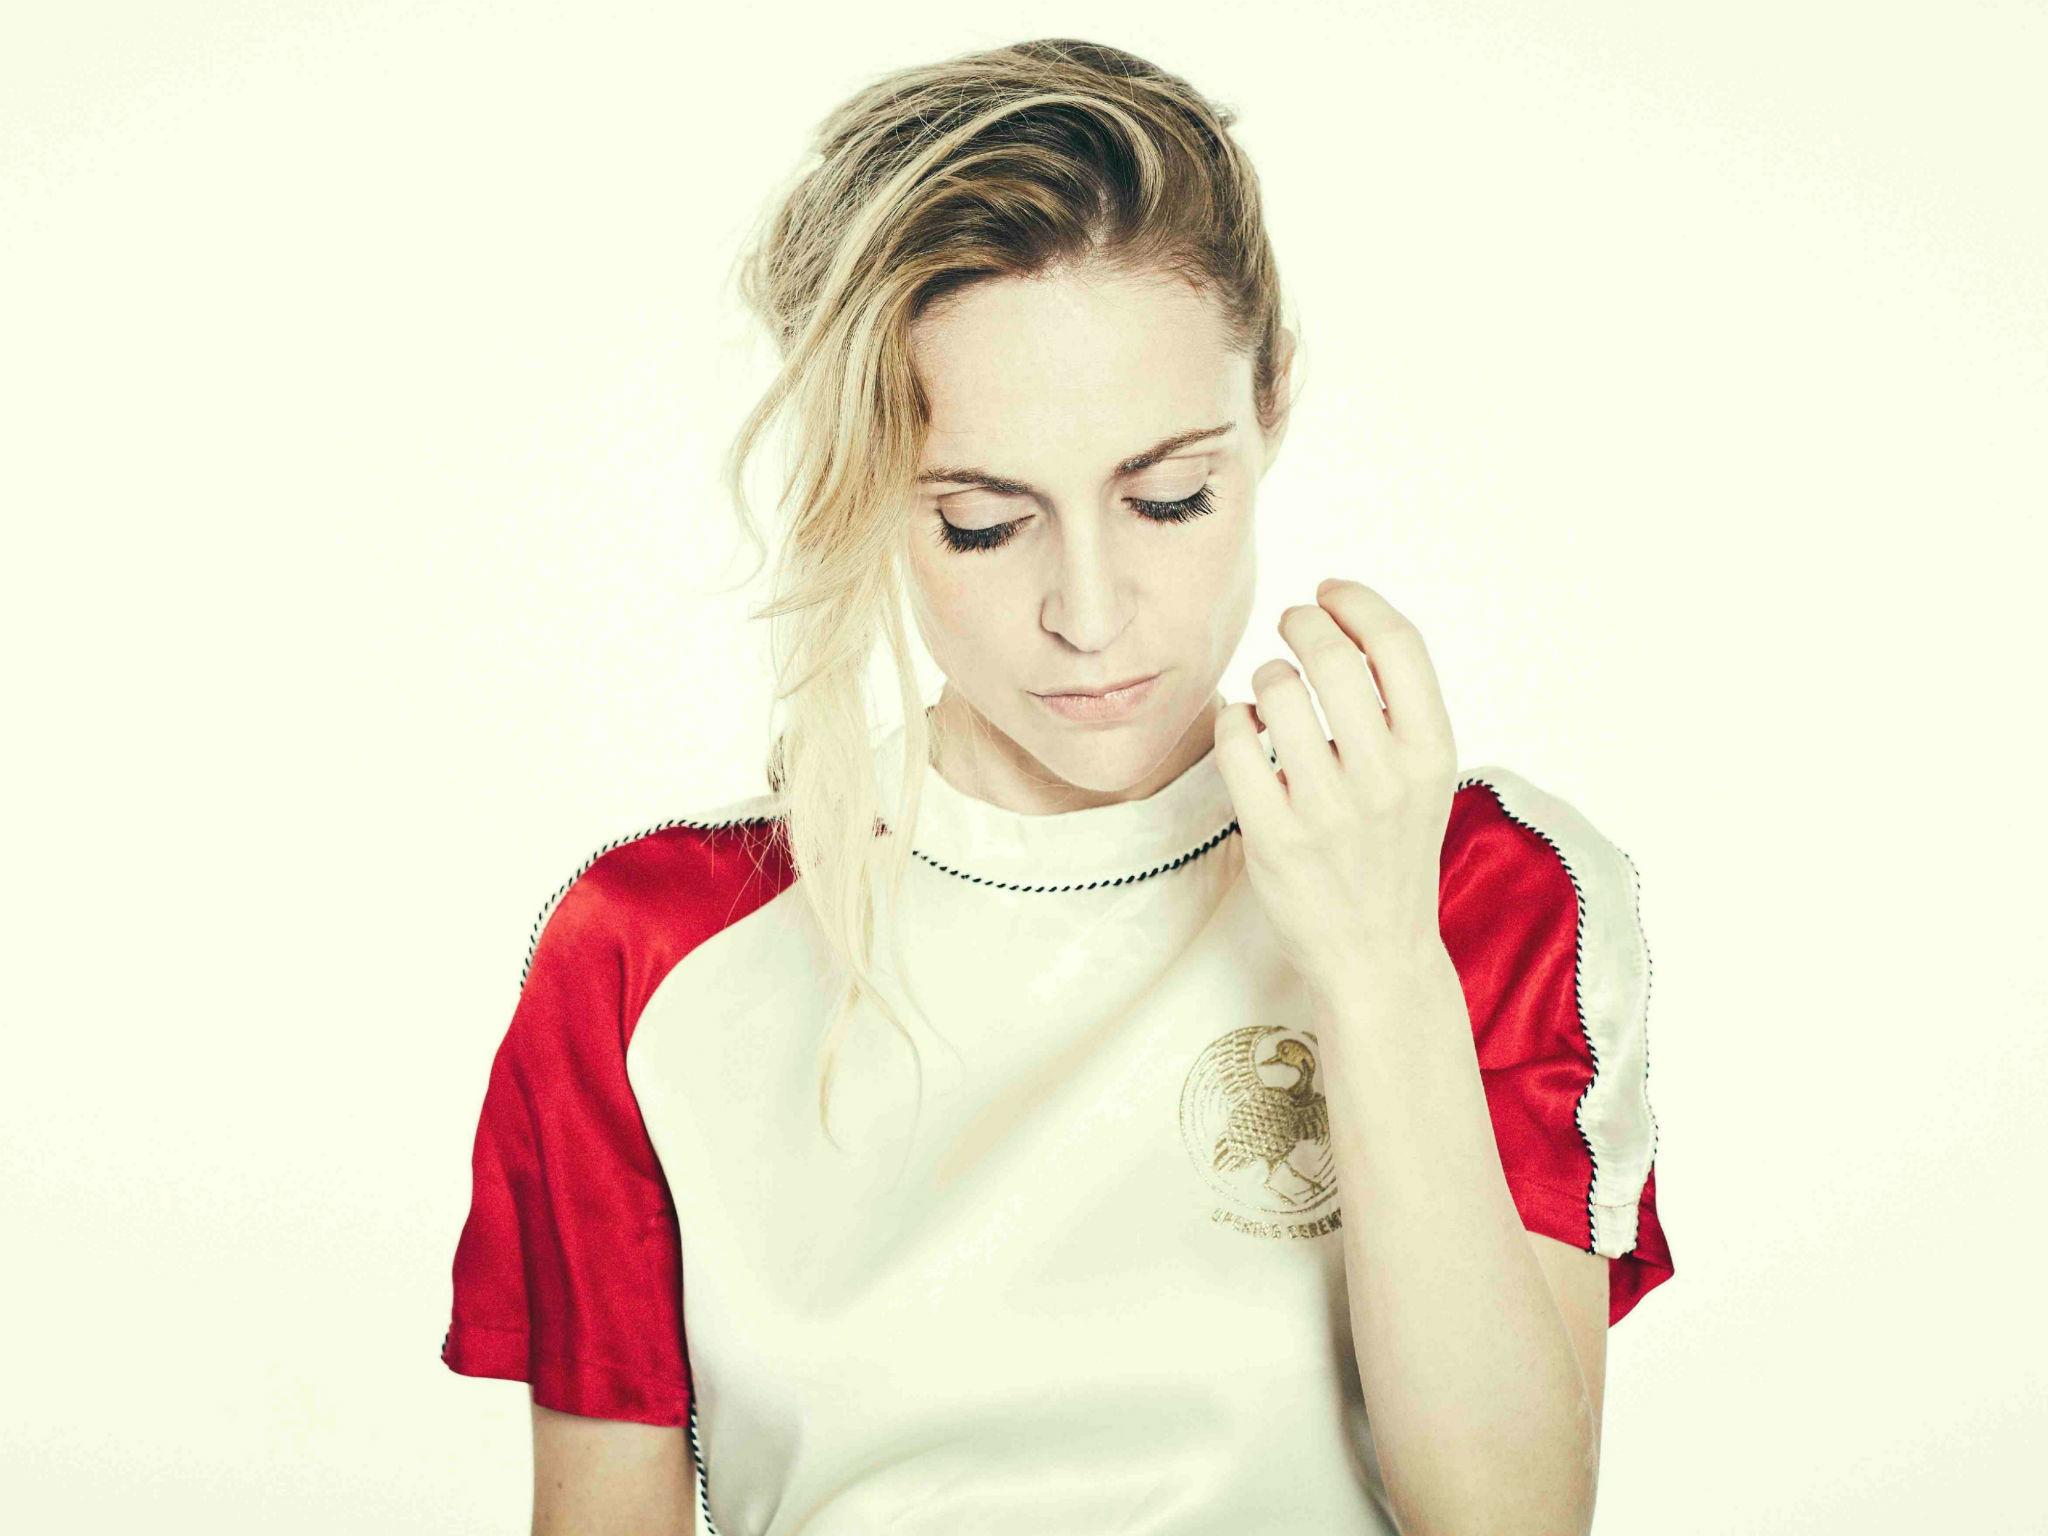 The Berlin-based musician, Agnes Obel, is releasing her new album, ‘Citizen of Glass’, later this month